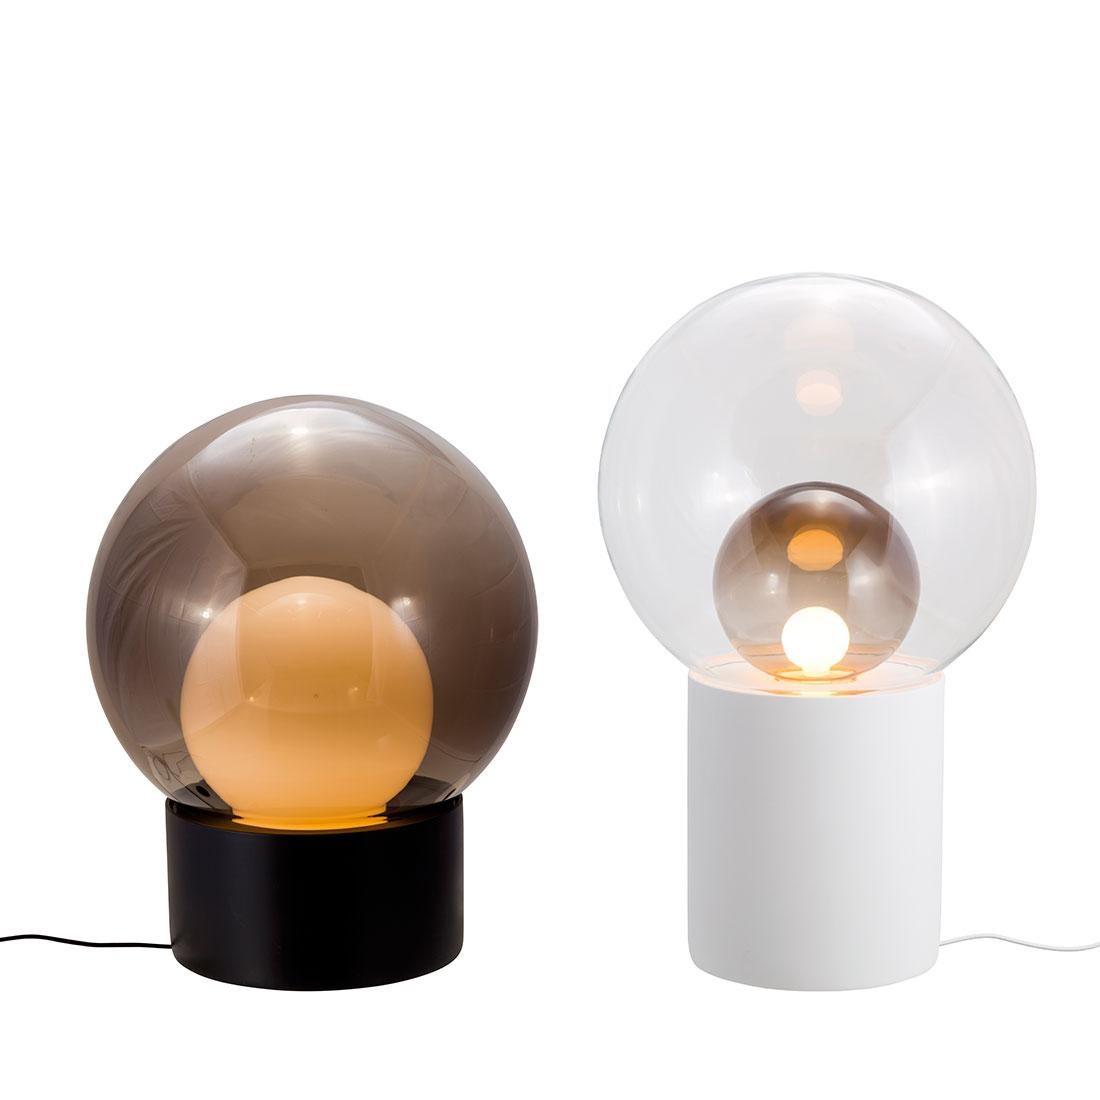 Boule, Table Light, Small, Transparent, European, Black, Minimal, 21st Century In New Condition For Sale In Weil am Rhein, DE